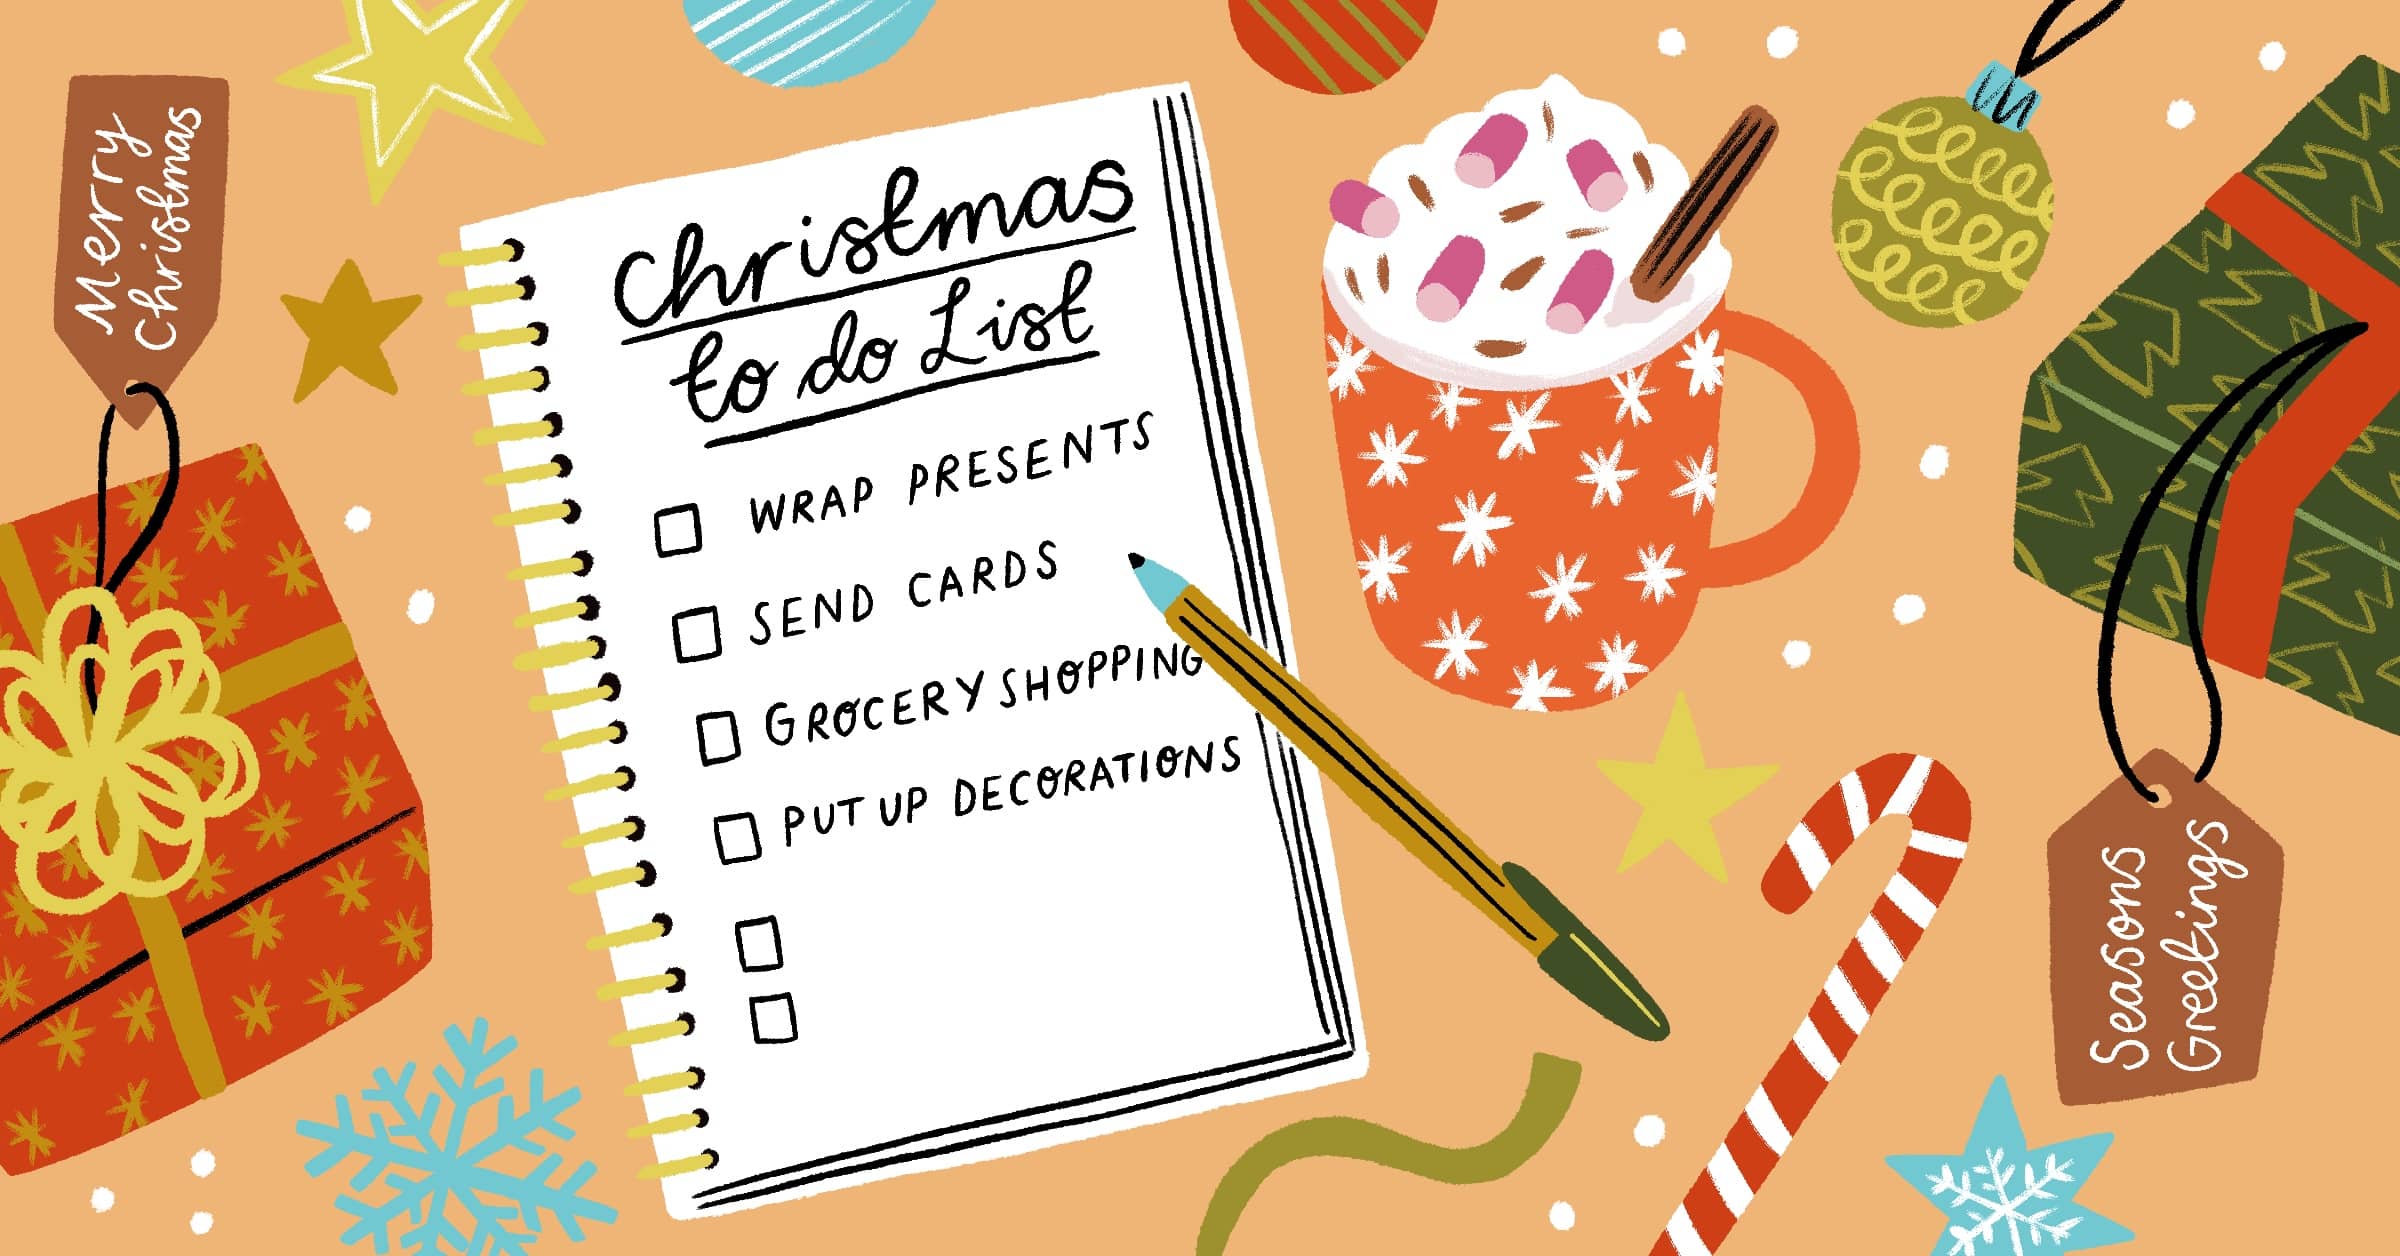 What To Do When Its Your Time To Organise Christmas 2